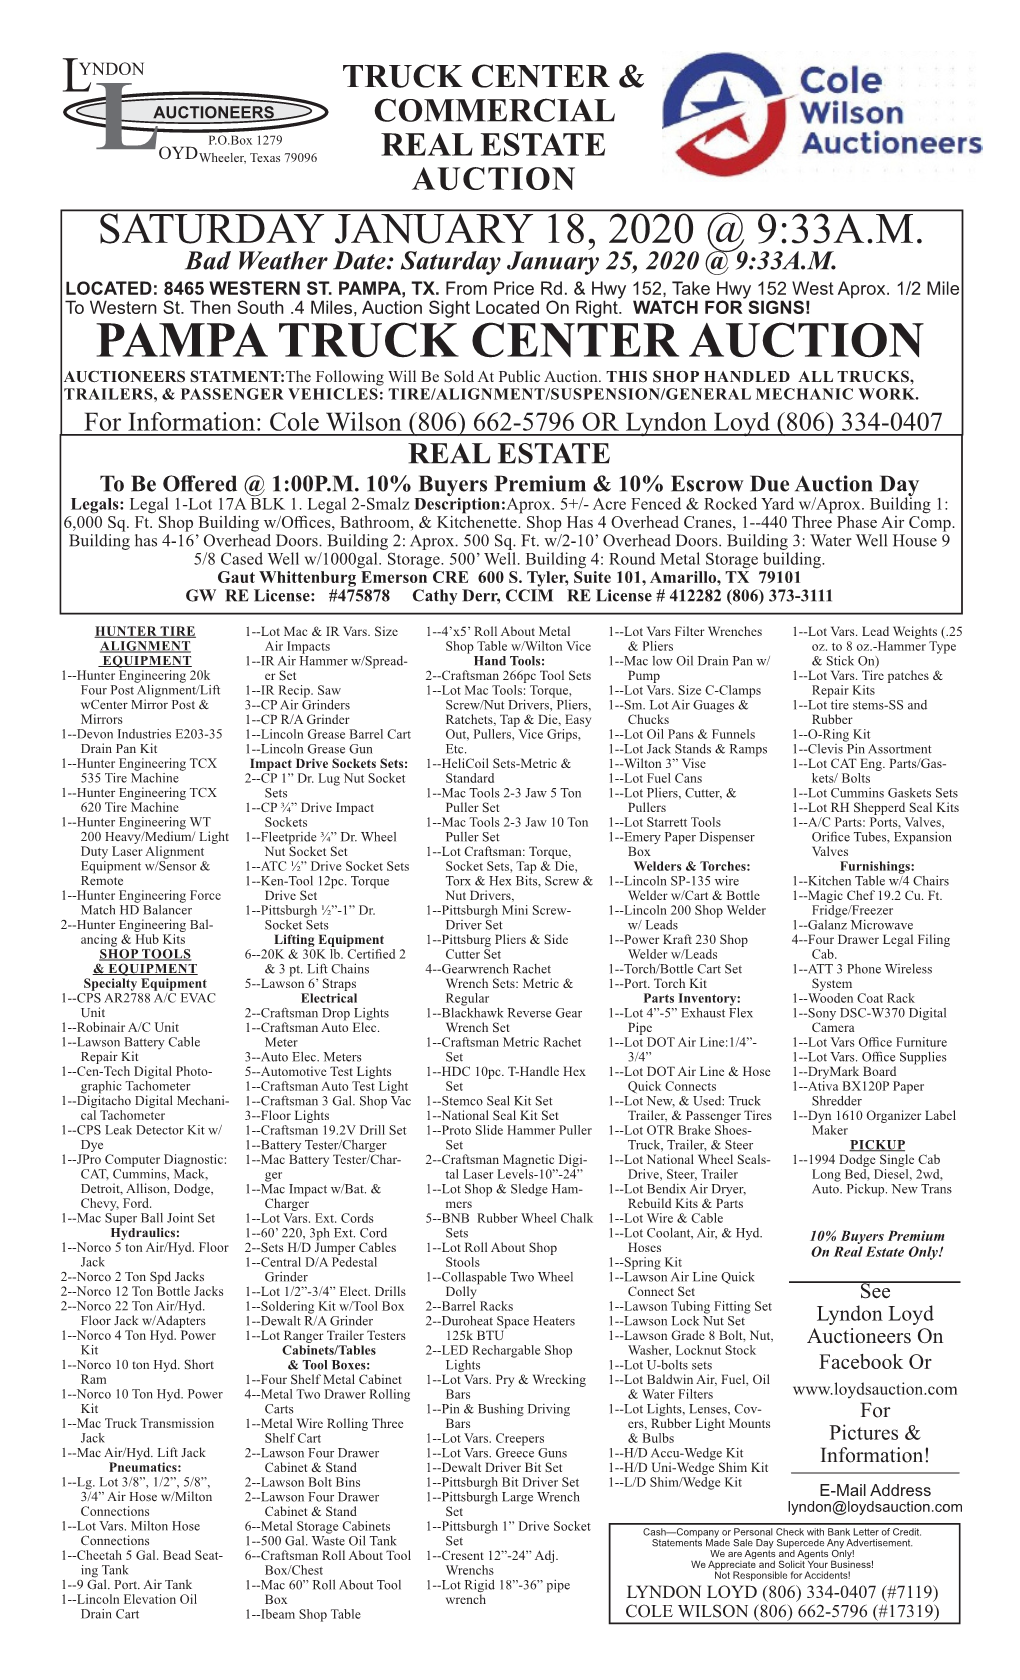 PAMPA TRUCK CENTER AUCTION AUCTIONEERS STATMENT:The Following Will Be Sold at Public Auction